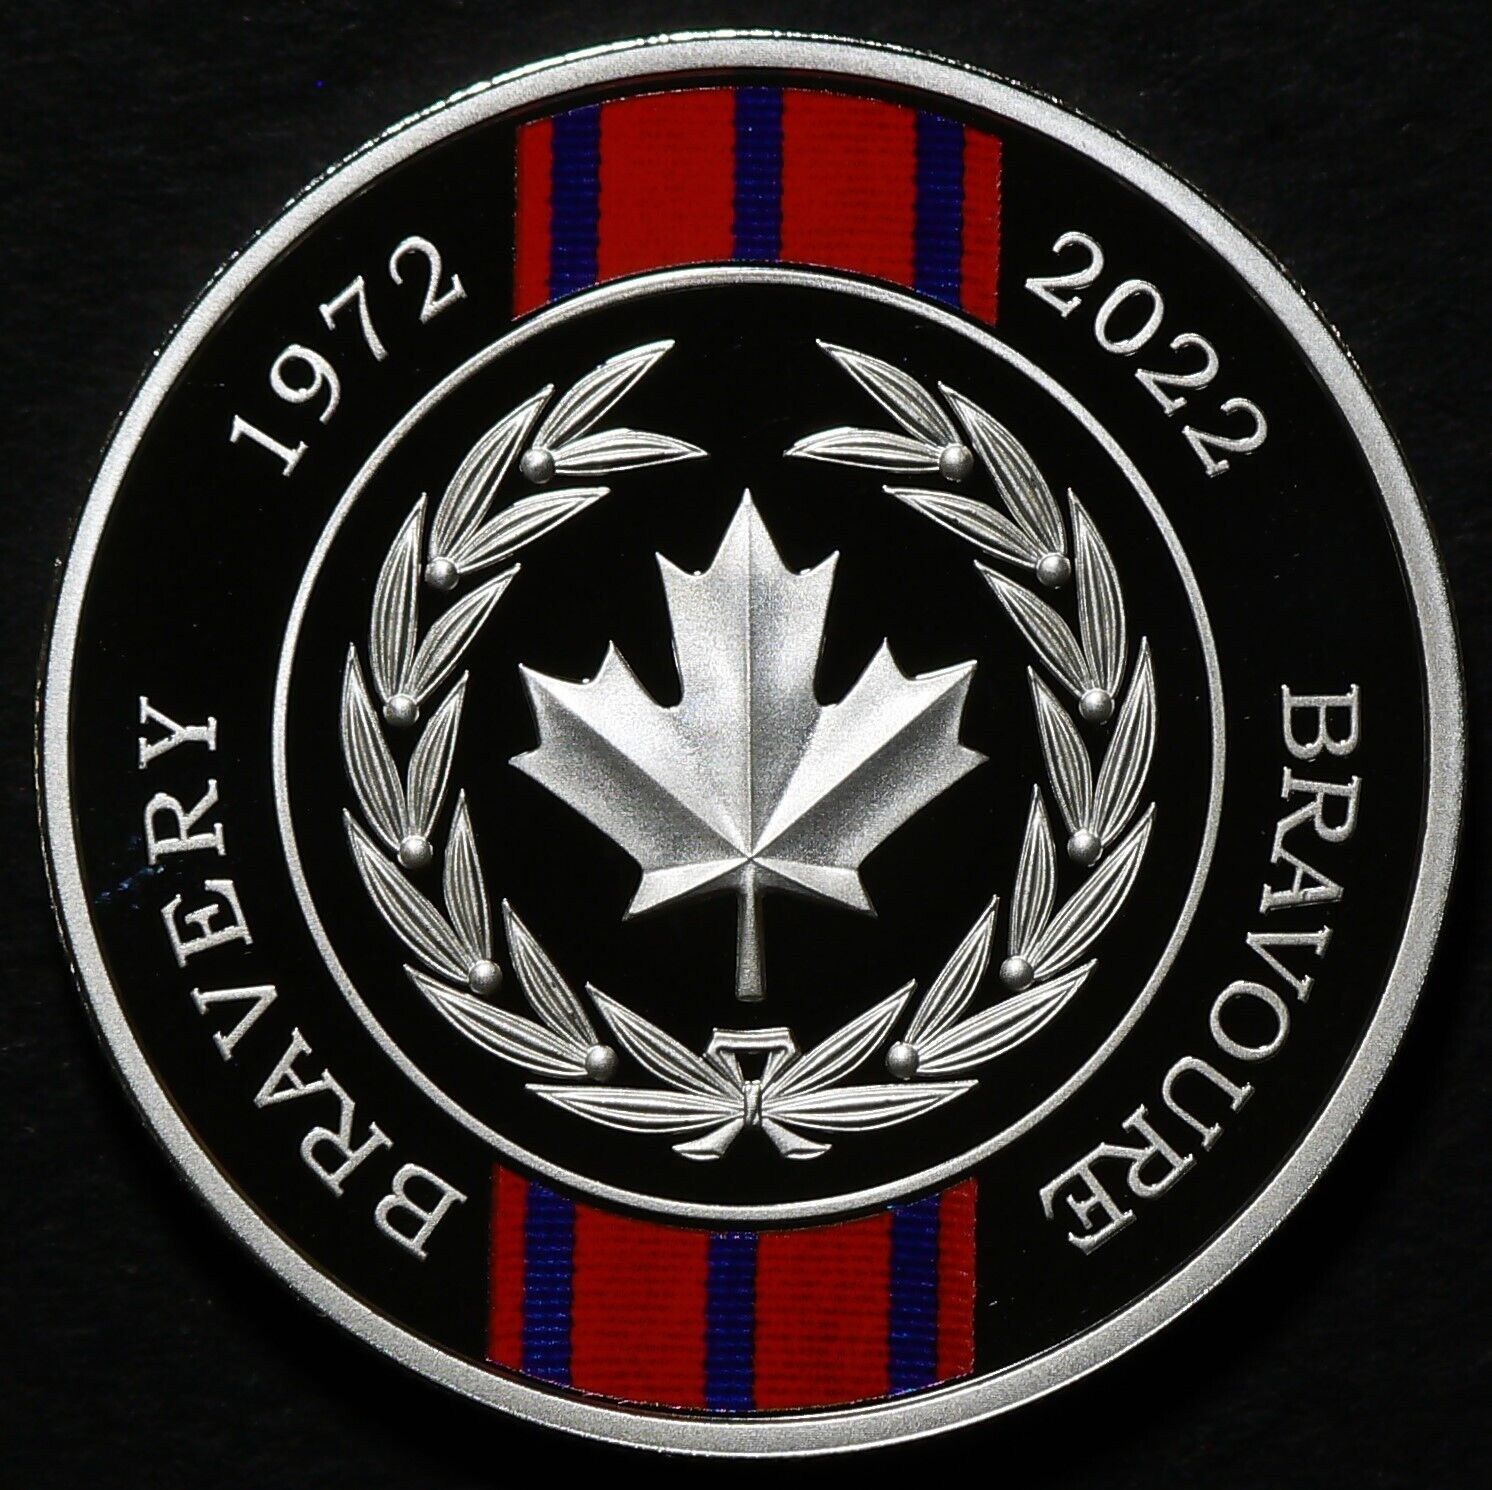 2022 Canada $20 Medal of Bravery Silver Proof #21663z